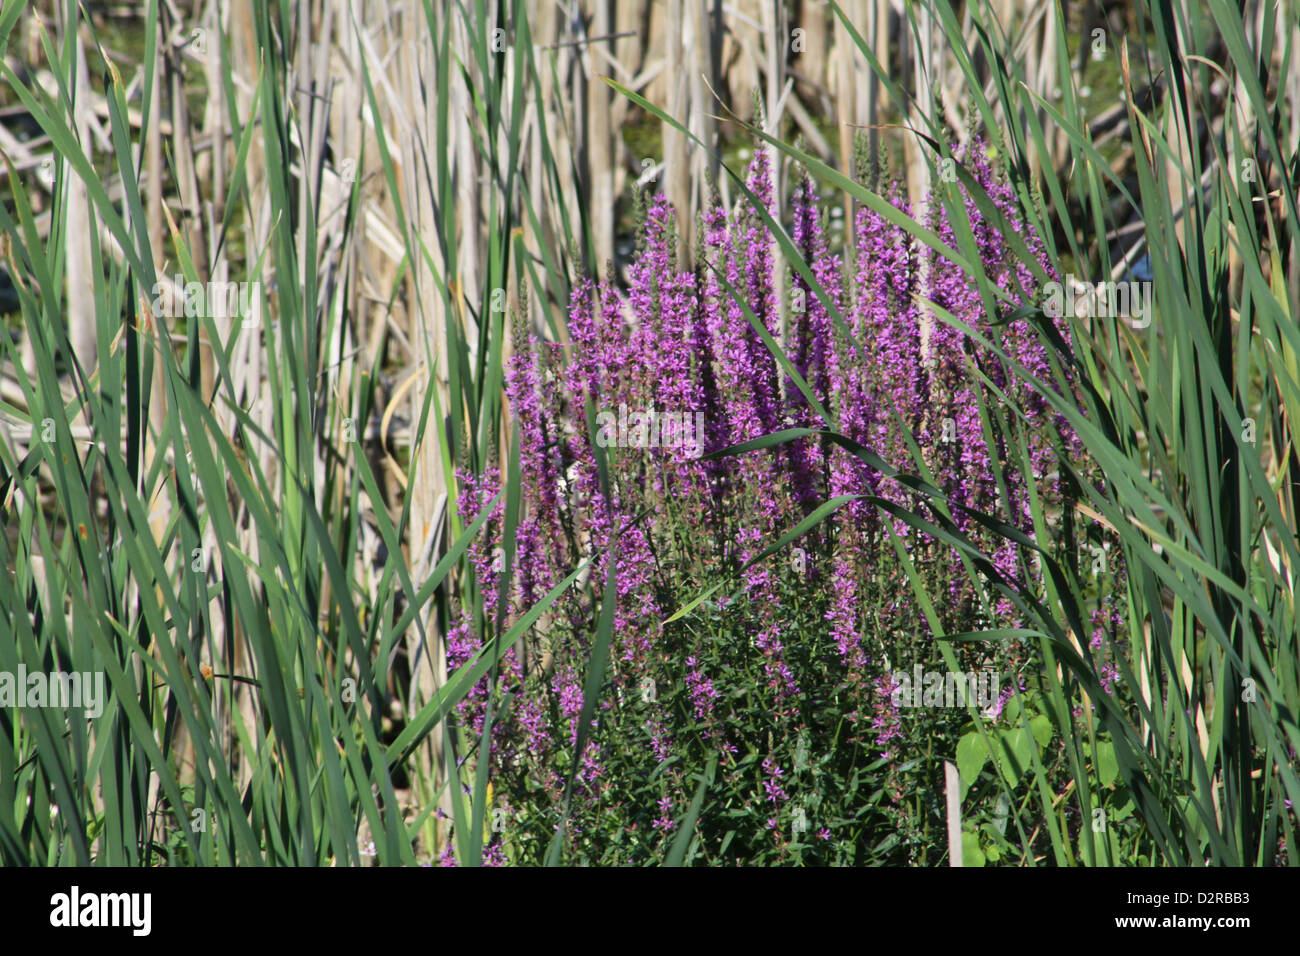 Purple Loosestrife is an invasive weed/plant native to Europe and Asia. This one found at the edge of a swamp in Eastern Ontario Stock Photo